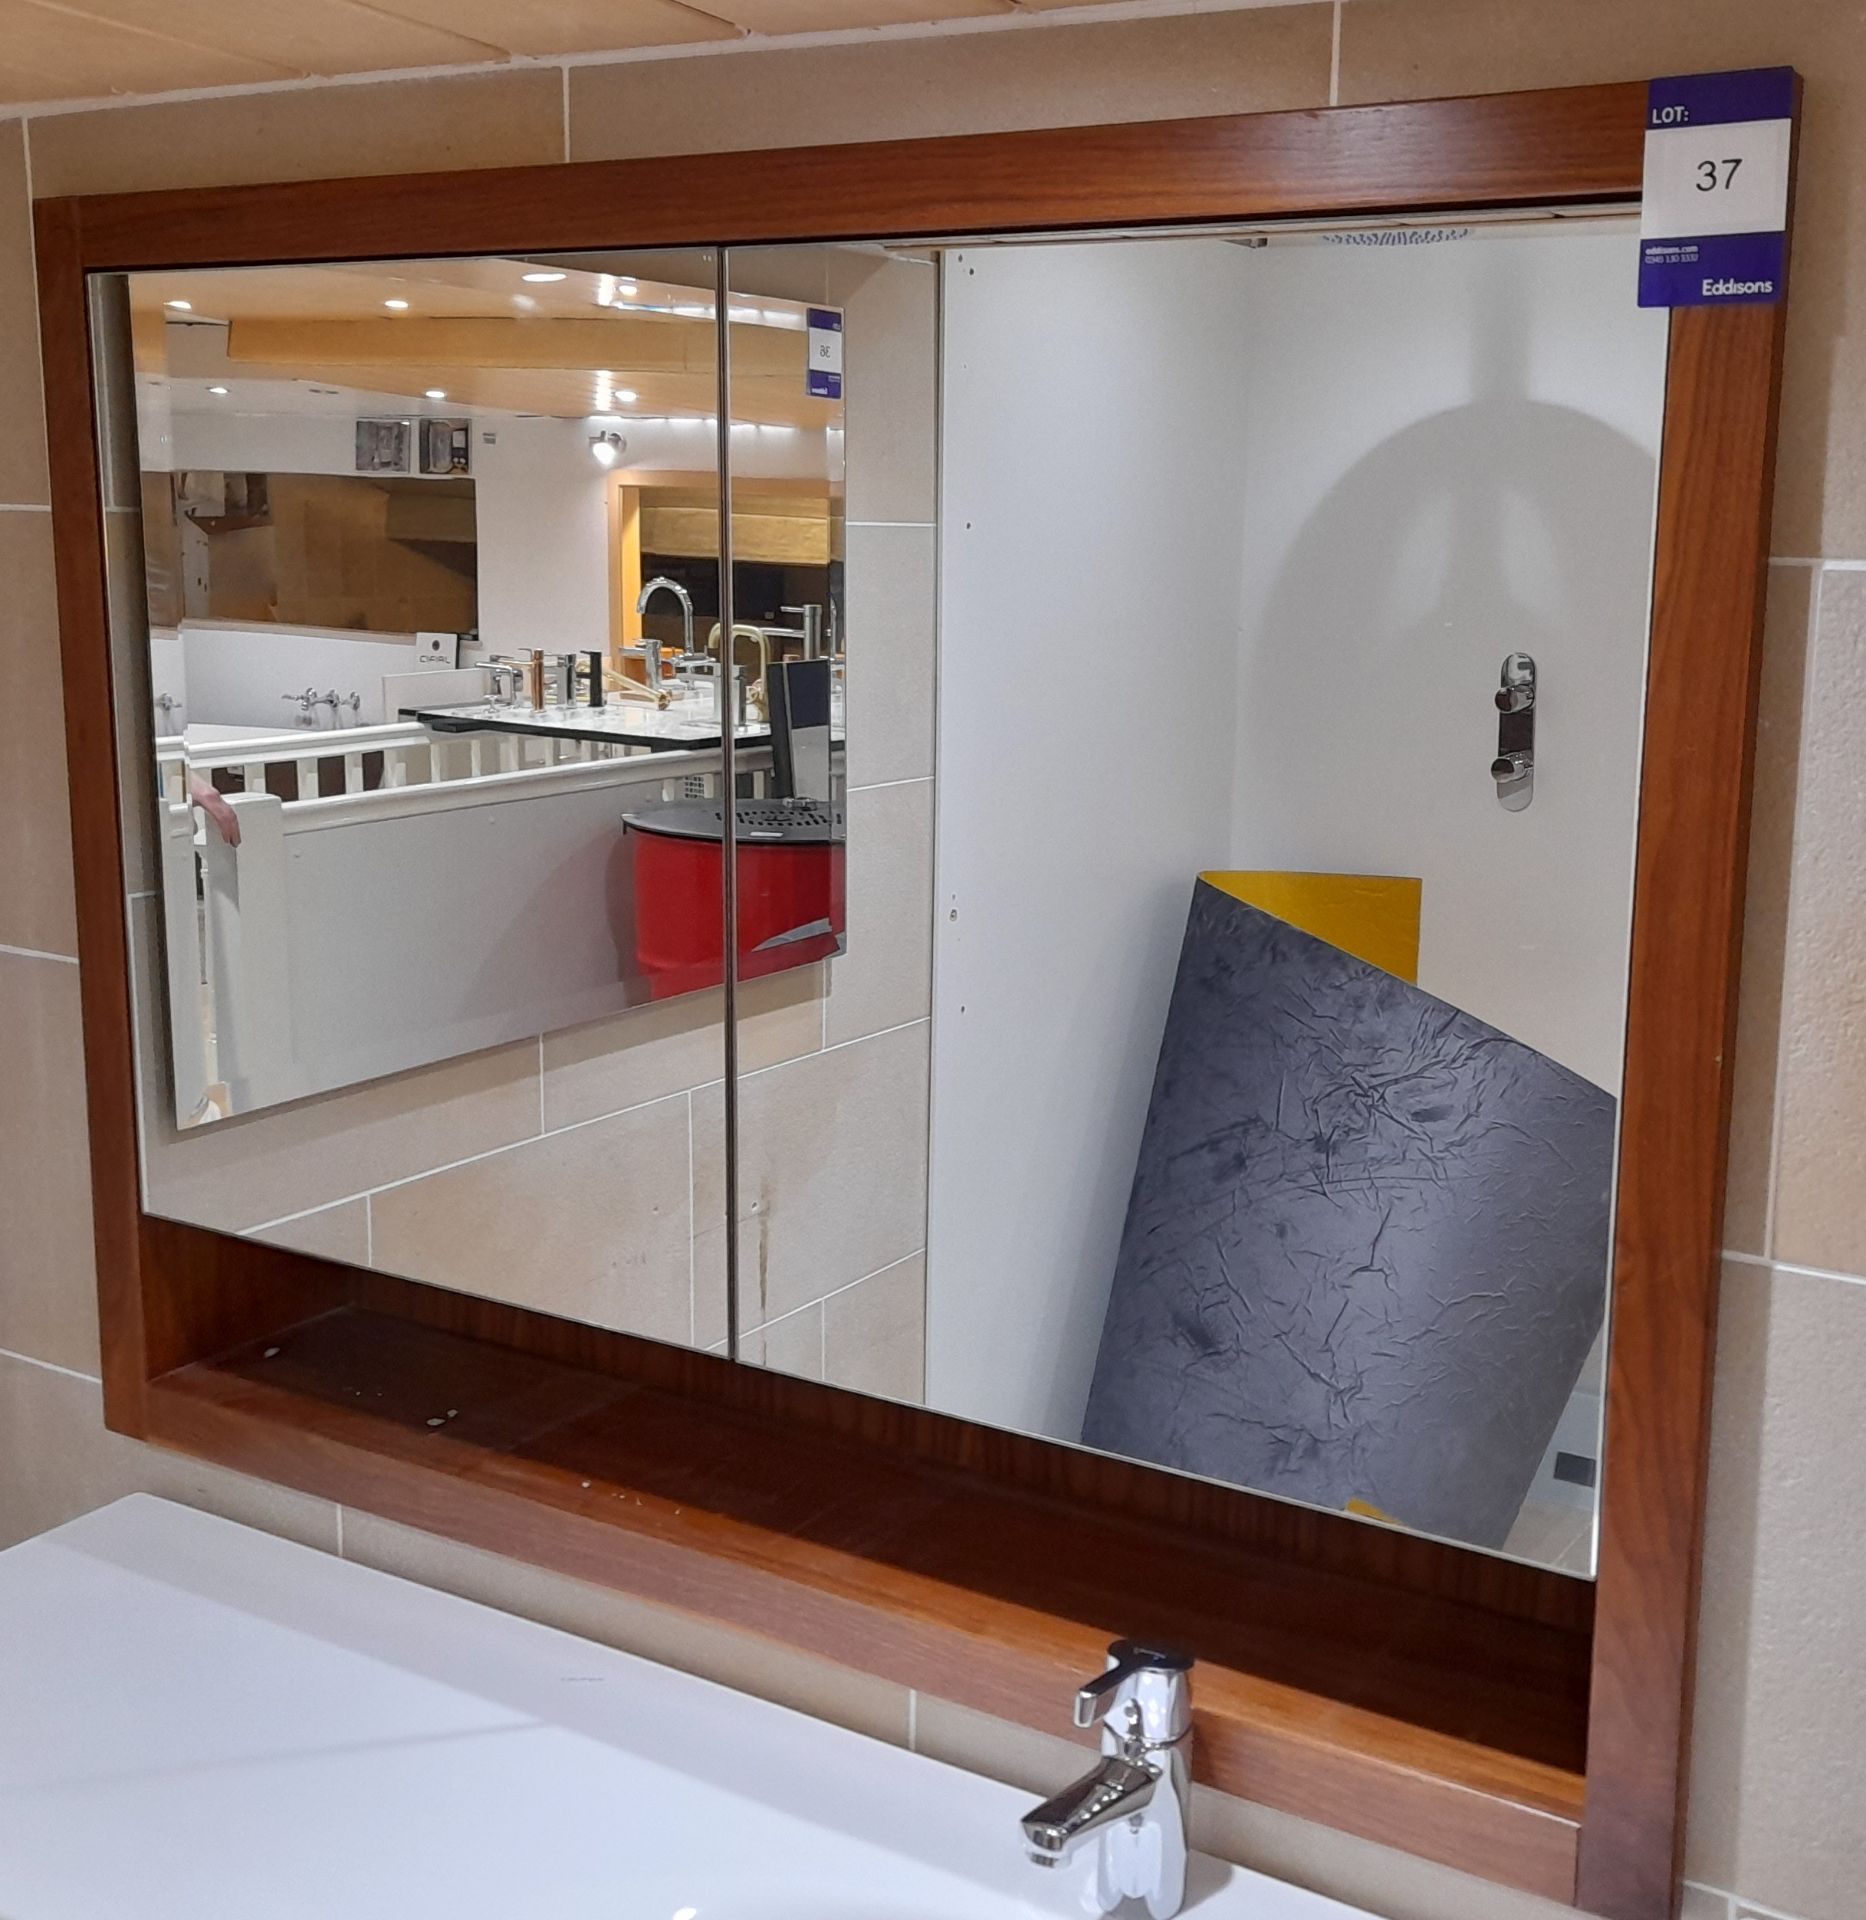 Walnut integrated / built-in mirrored cabinet, to